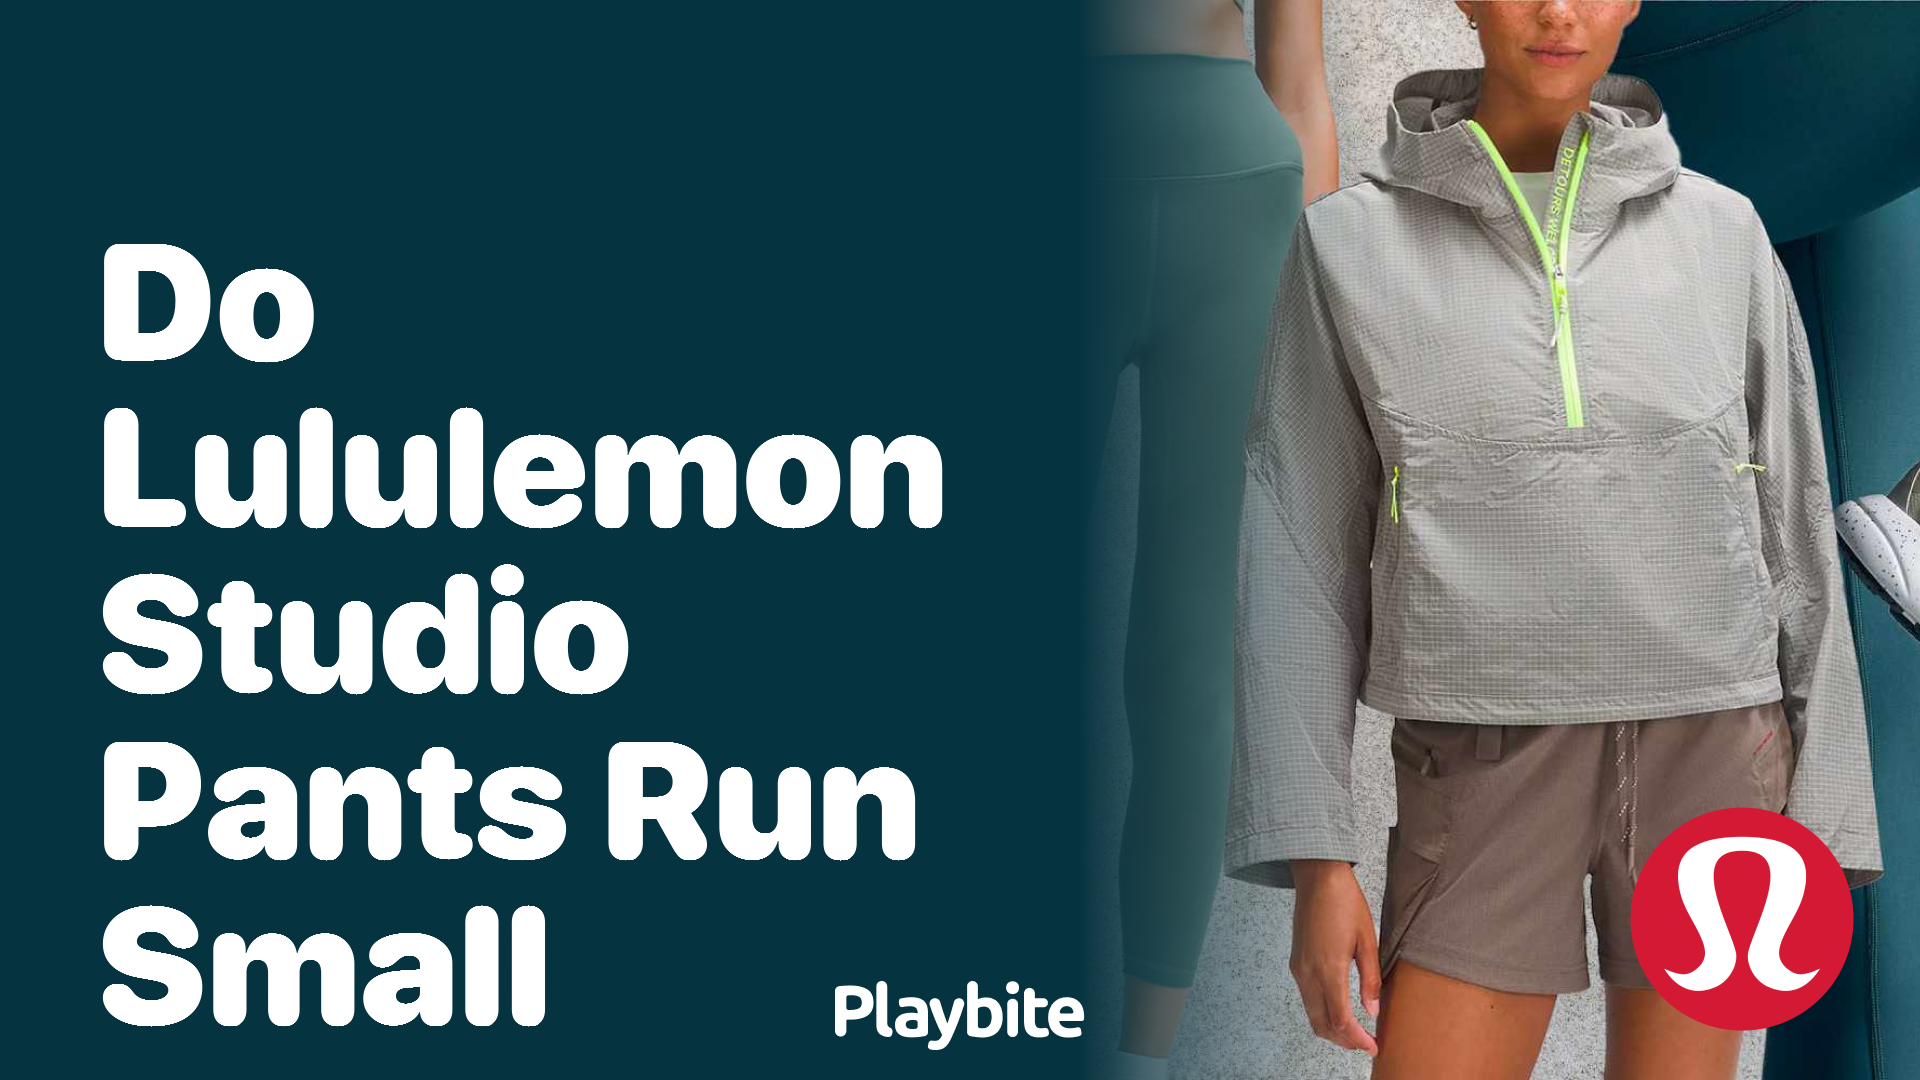 Do Lululemon Studio Pants Run Small? Find Out Here! - Playbite